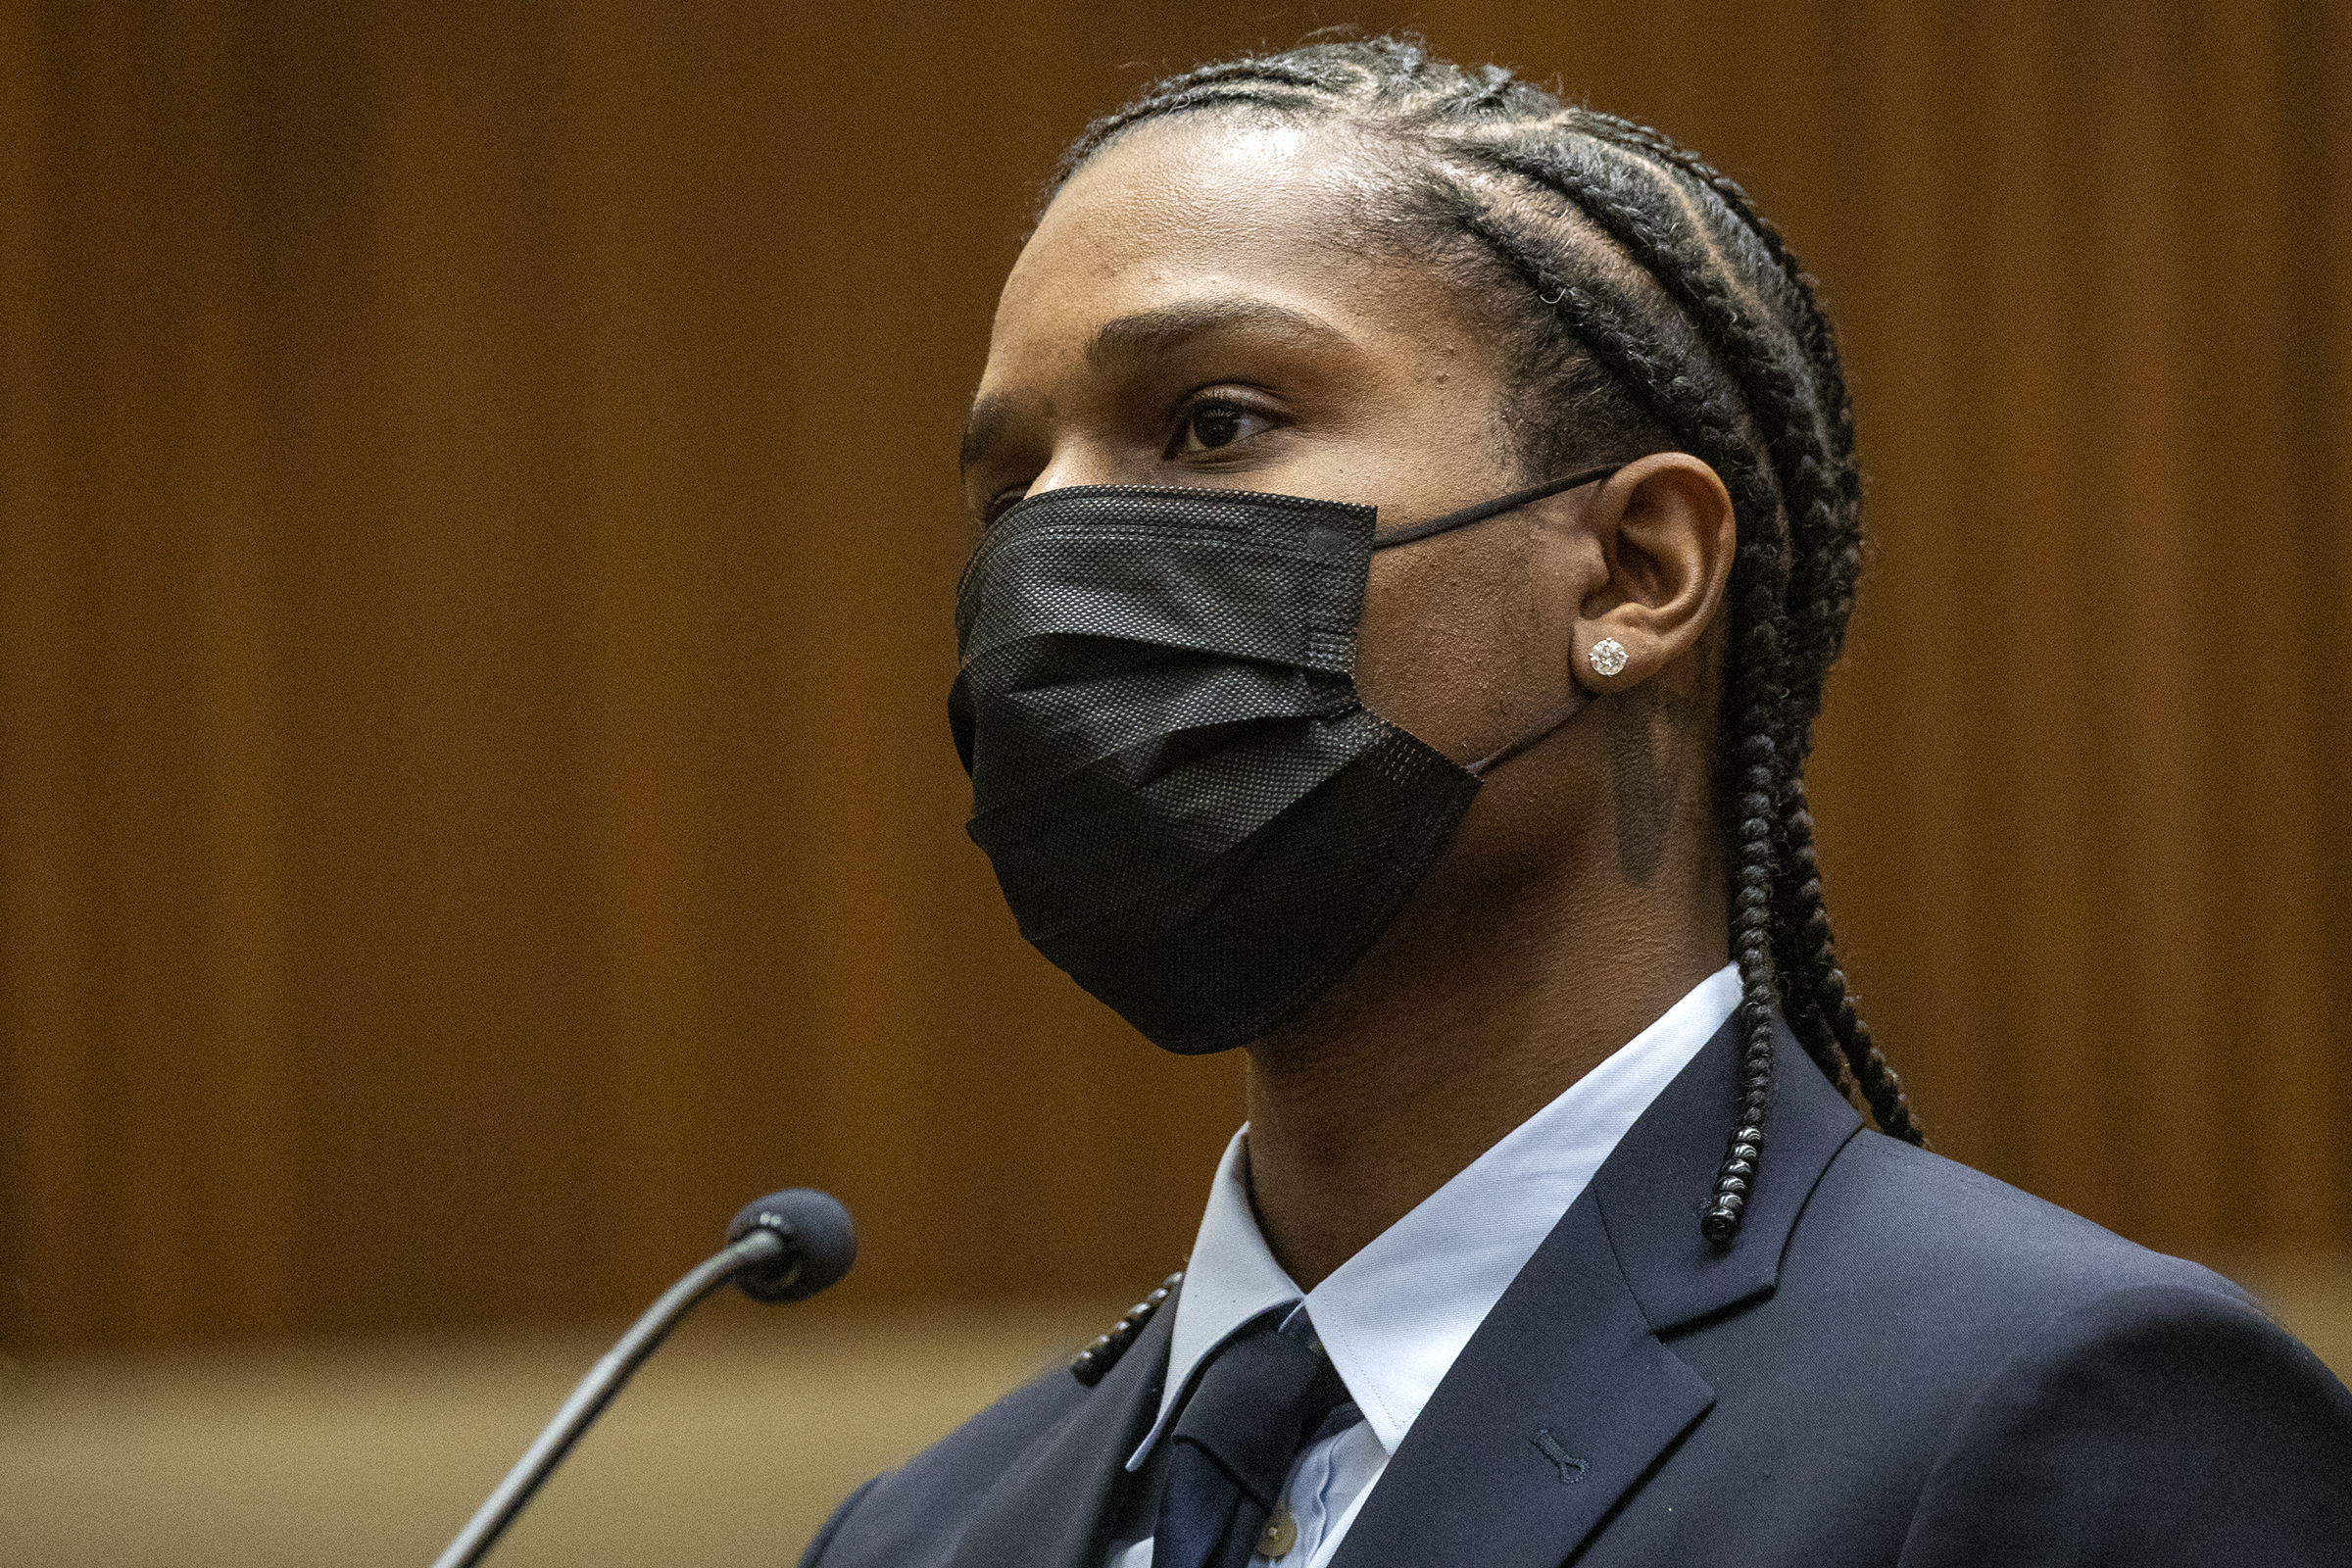 Rapper A$AP Rocky appears in a Los Angeles  courtroom on August 17, 2022, for his arraignment. - A$AP Rocky, born Rakim Mayers, pleaded not guilty at his arraignment on two counts of assault with a firearm stemming from an alleged run-in with A$AP Relli in Hollywood last November. A$AP Rocky is due back in court on November 2, 2022. (Photo by Irfan Khan / POOL / AFP)